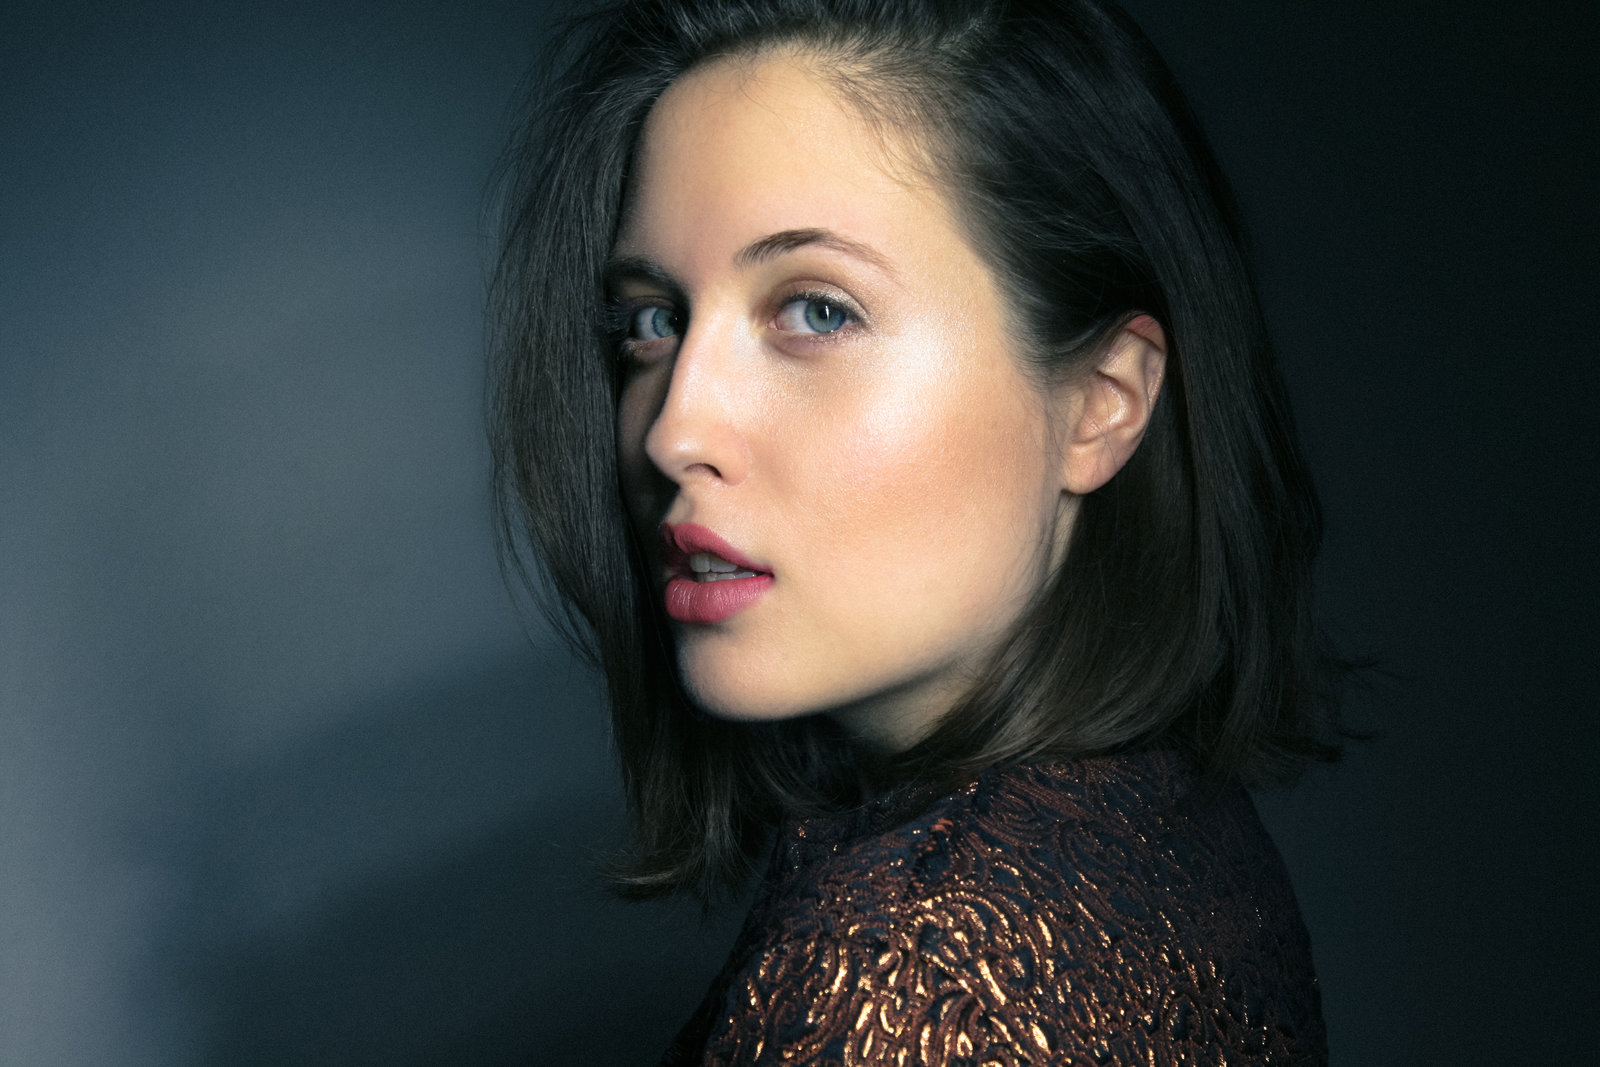 Indie Obsessive: “No Roots” by Alice Merton – A Song Review